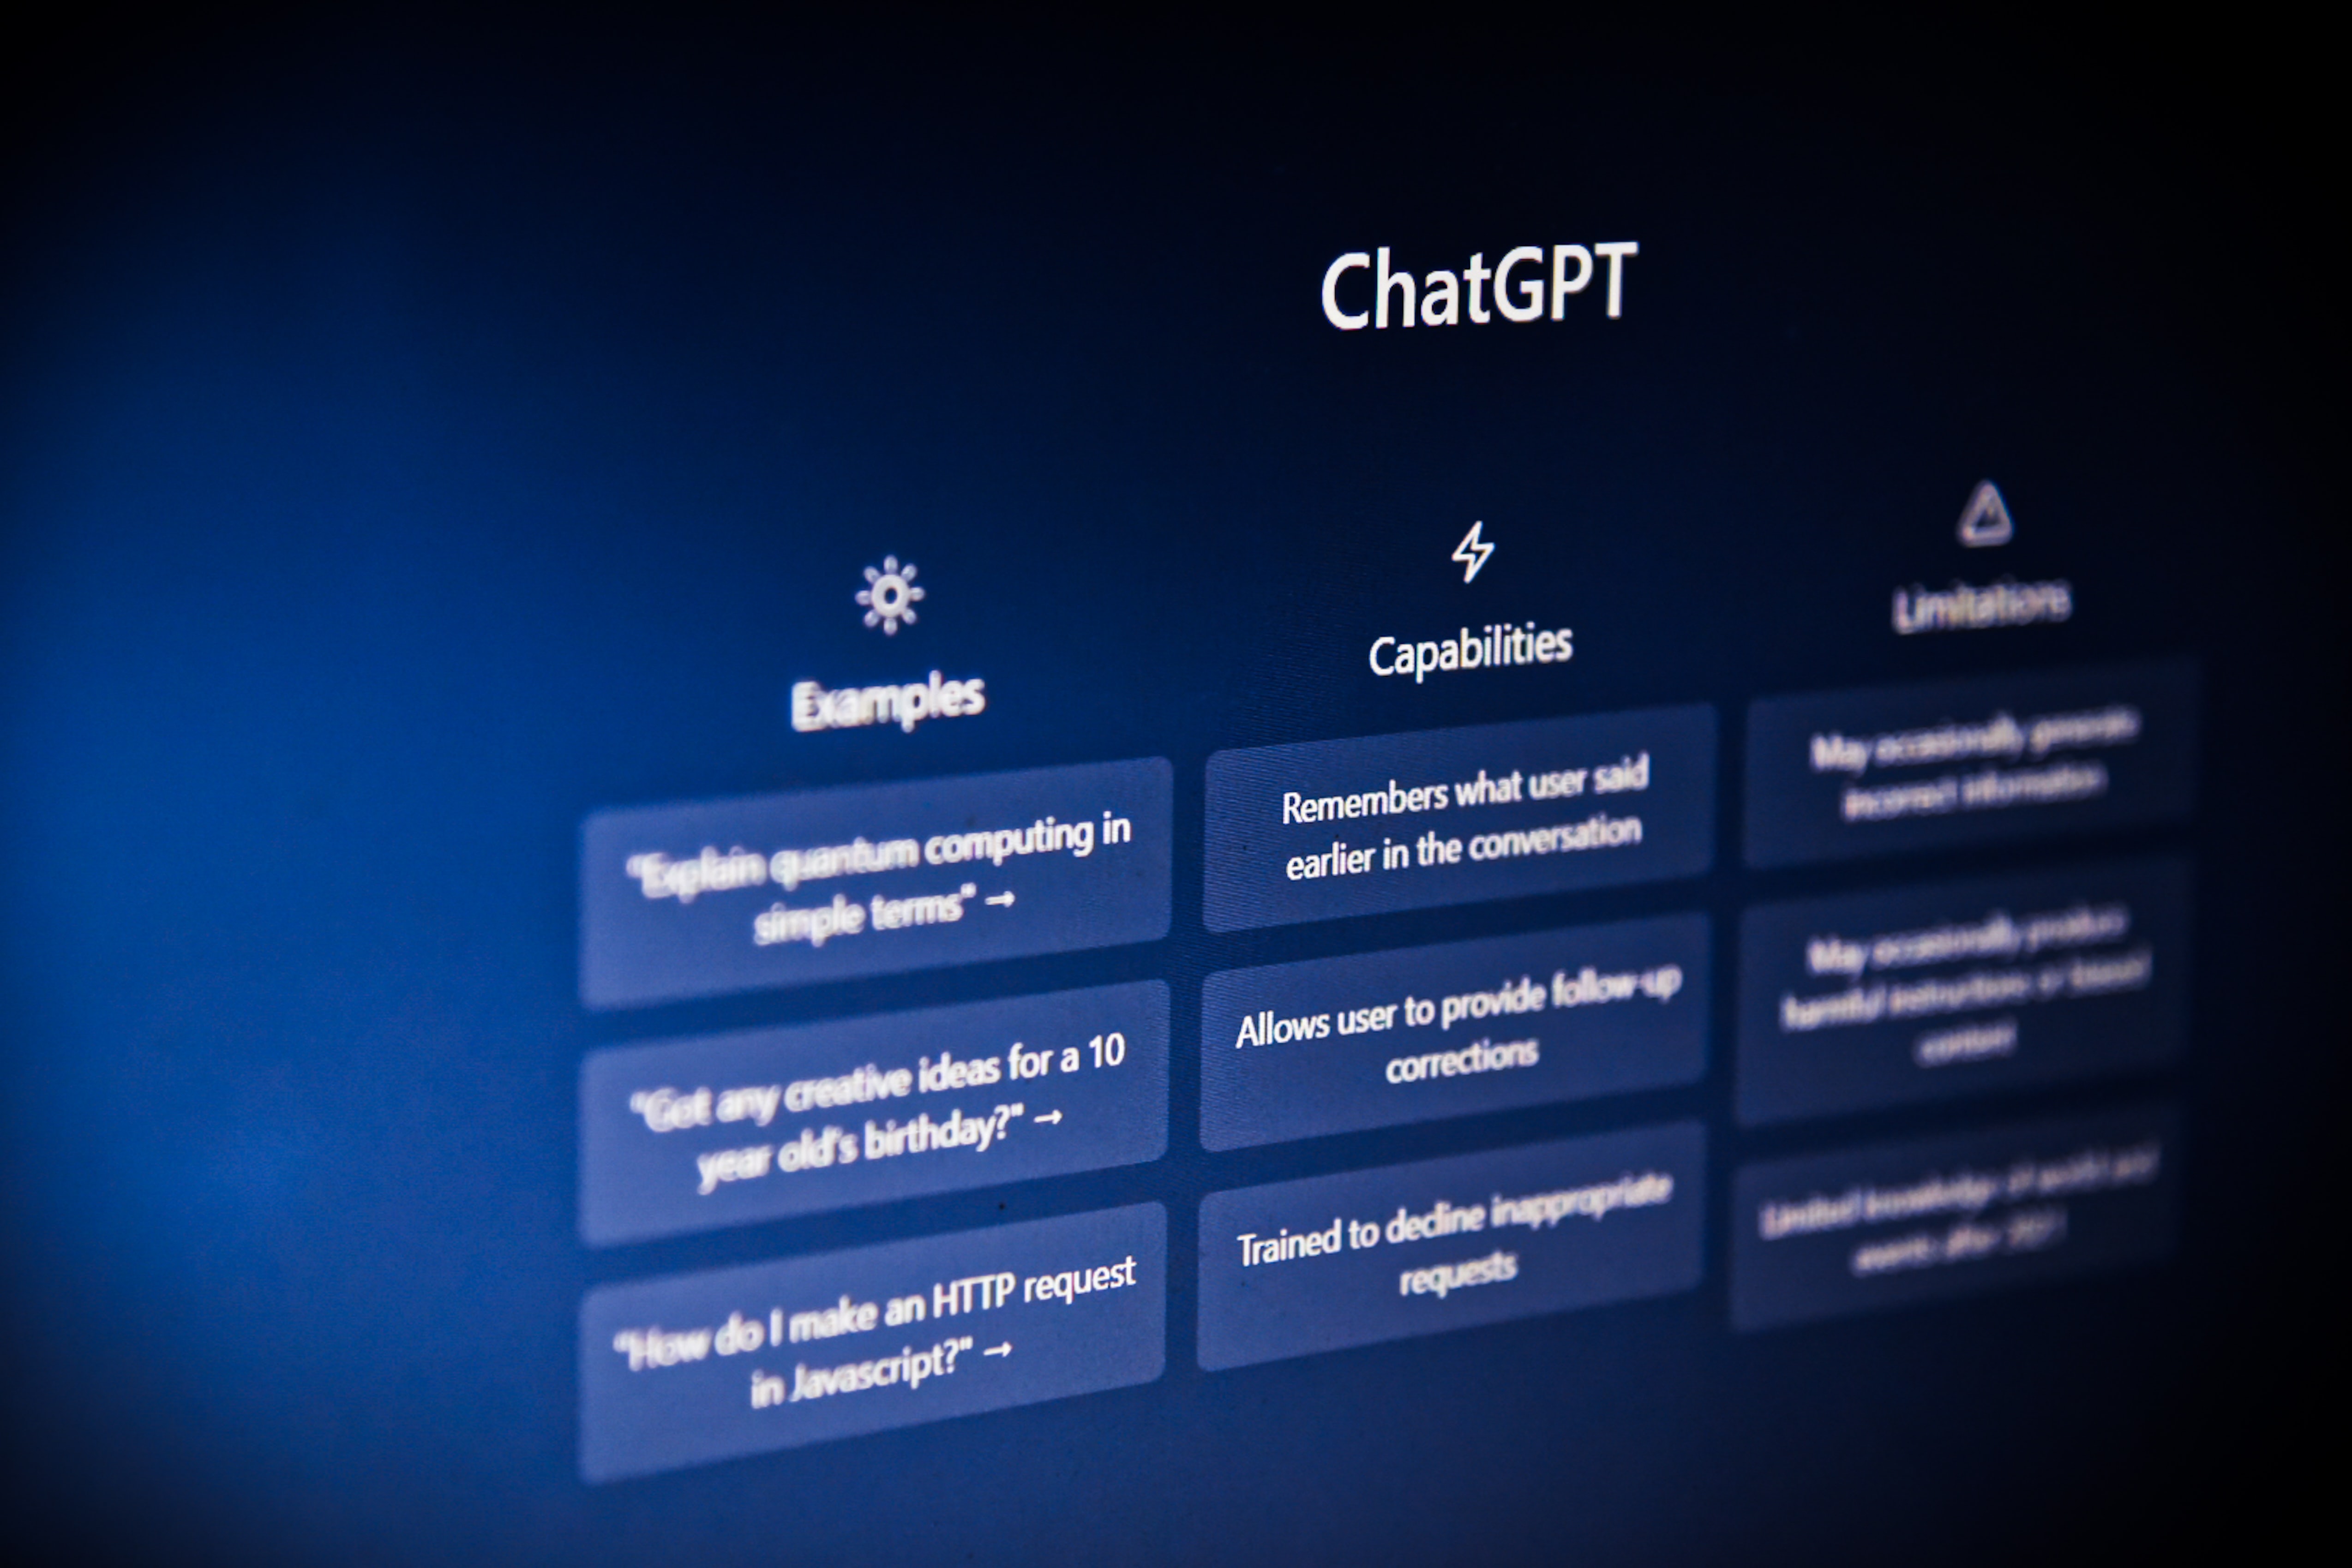 Using ChatGPT in my everyday workflow